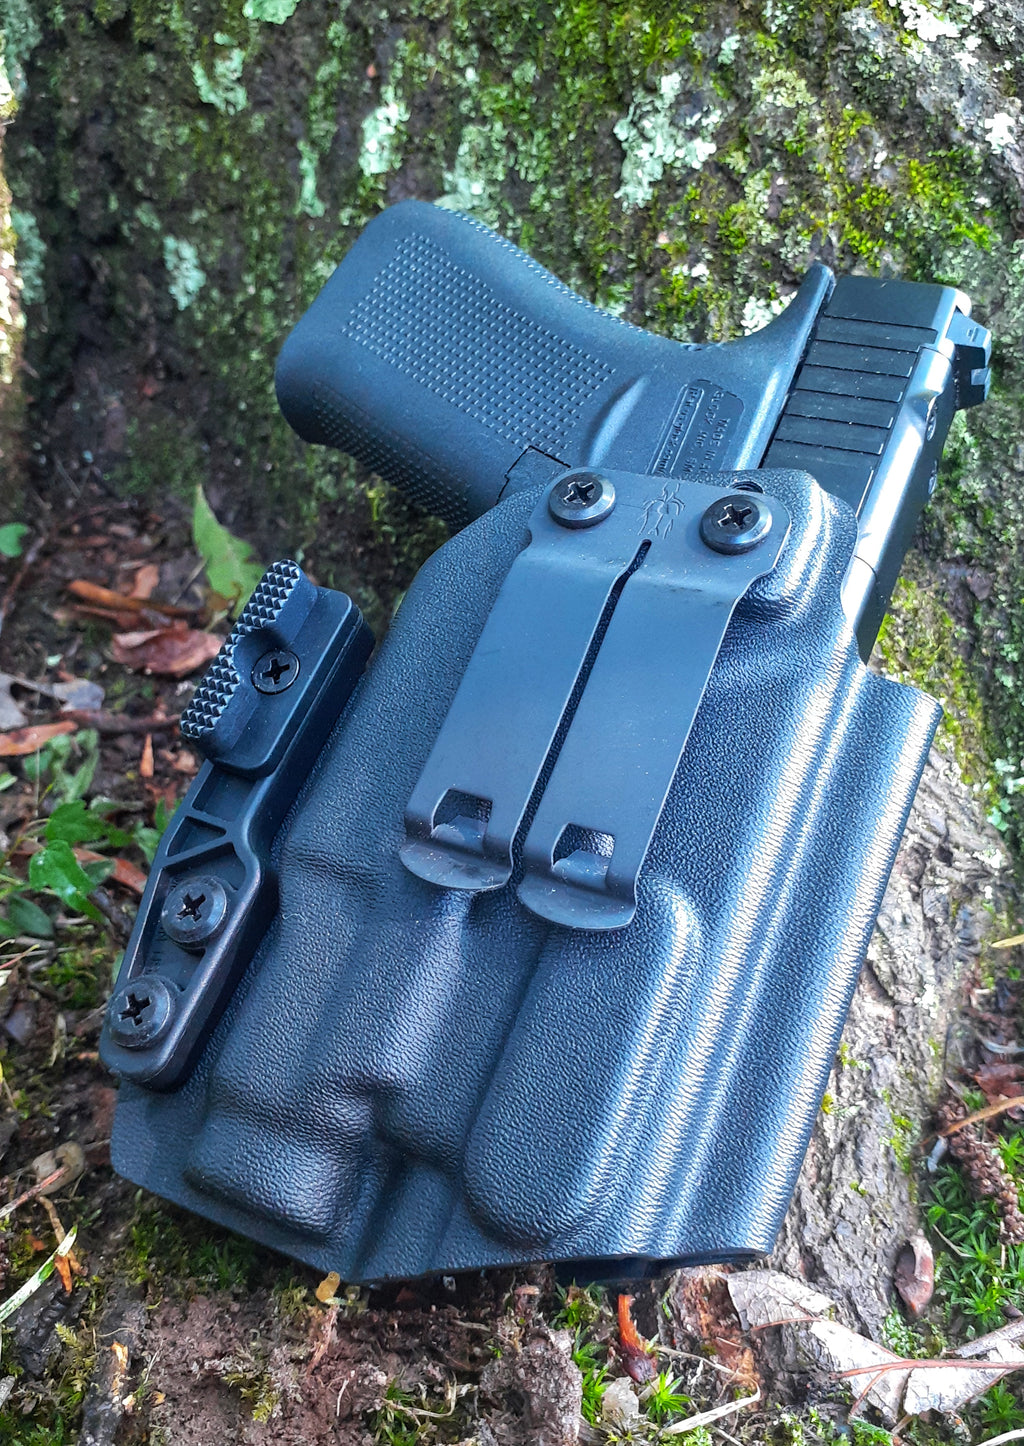 Inside the waistband holster compatible with Sig P365 and tlr7 sub light